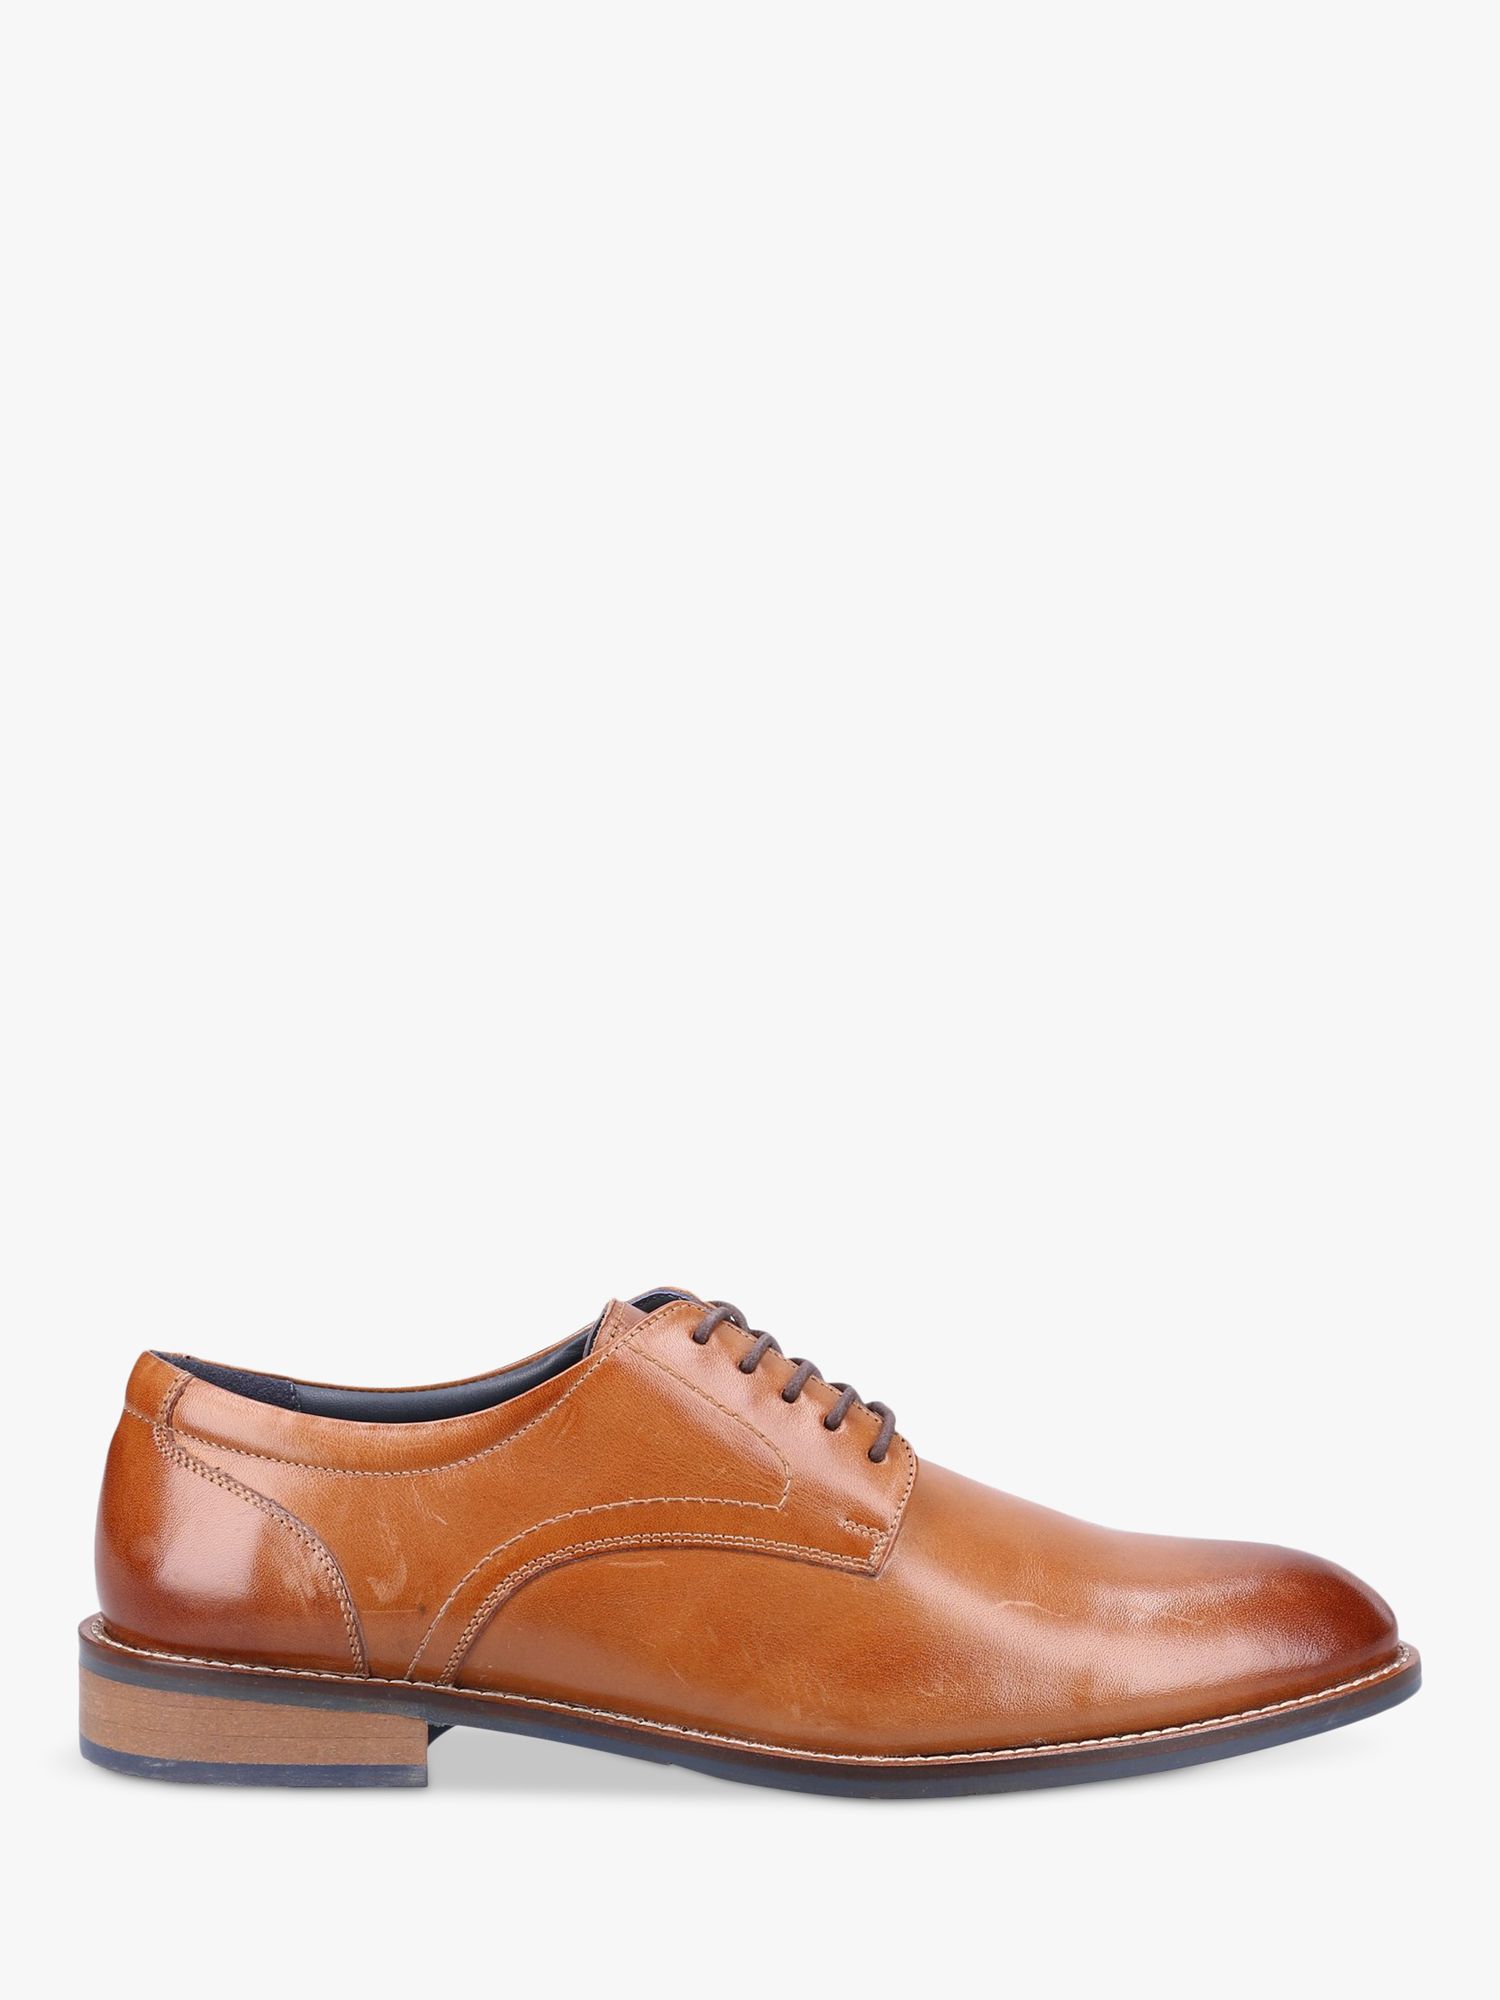 Hush Puppies Damien Leather Derby Shoes, Tan, 12